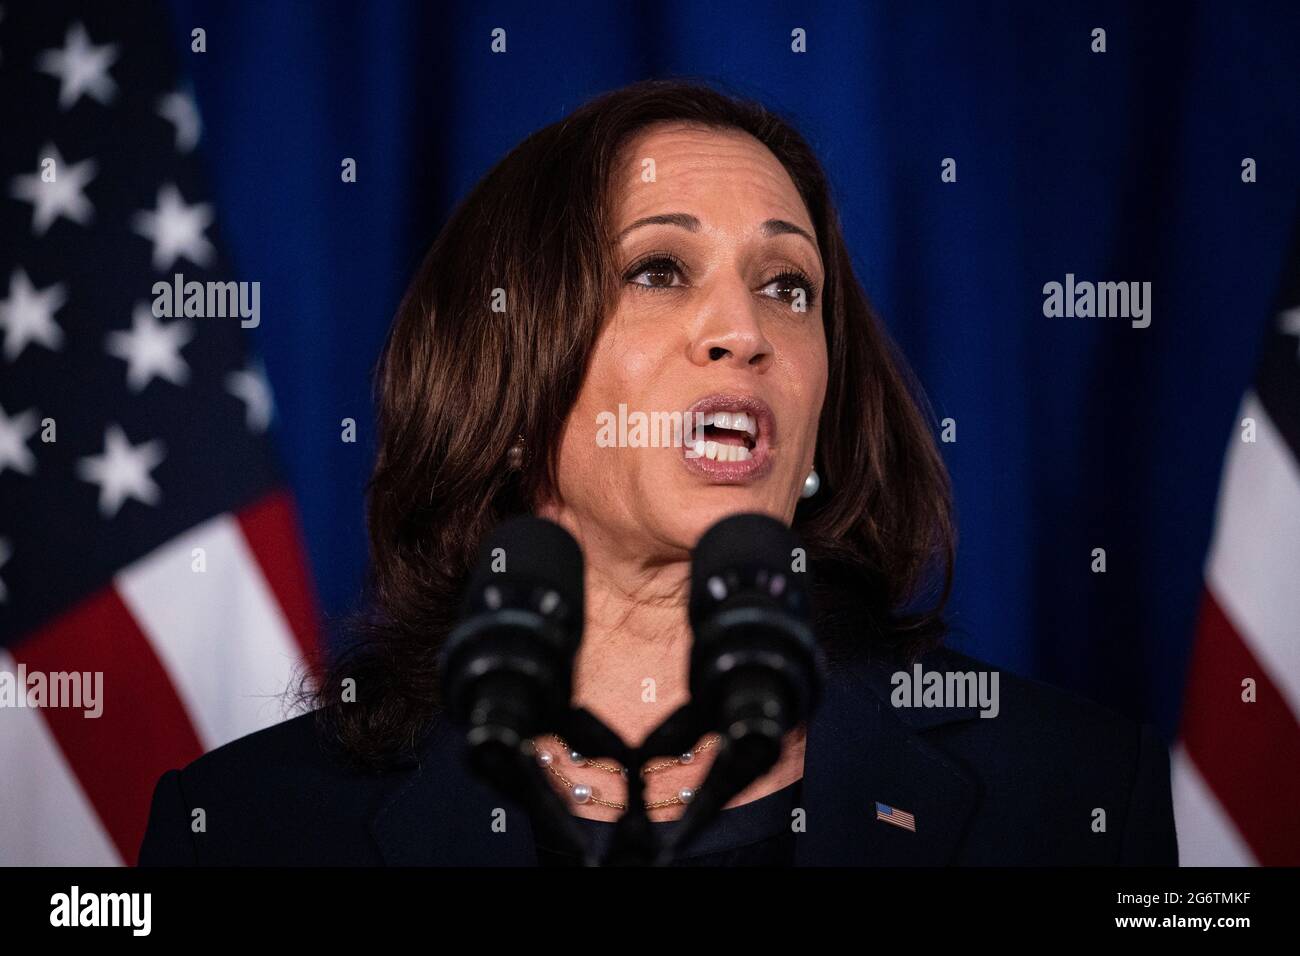 Washington, USA. 08th July, 2021. U.S. Vice President Kamala Harris speaks at Howard University in Washington, DC, U.S., on Thursday, July 8, 2021. Harris, who is spearheading the administration's efforts on voting rights, is helping to launch an expansion of the Democratic National Committee's 'I Will Vote' campaign. Photographer: Al Drago/Pool/Sipa USA Credit: Sipa USA/Alamy Live News Stock Photo